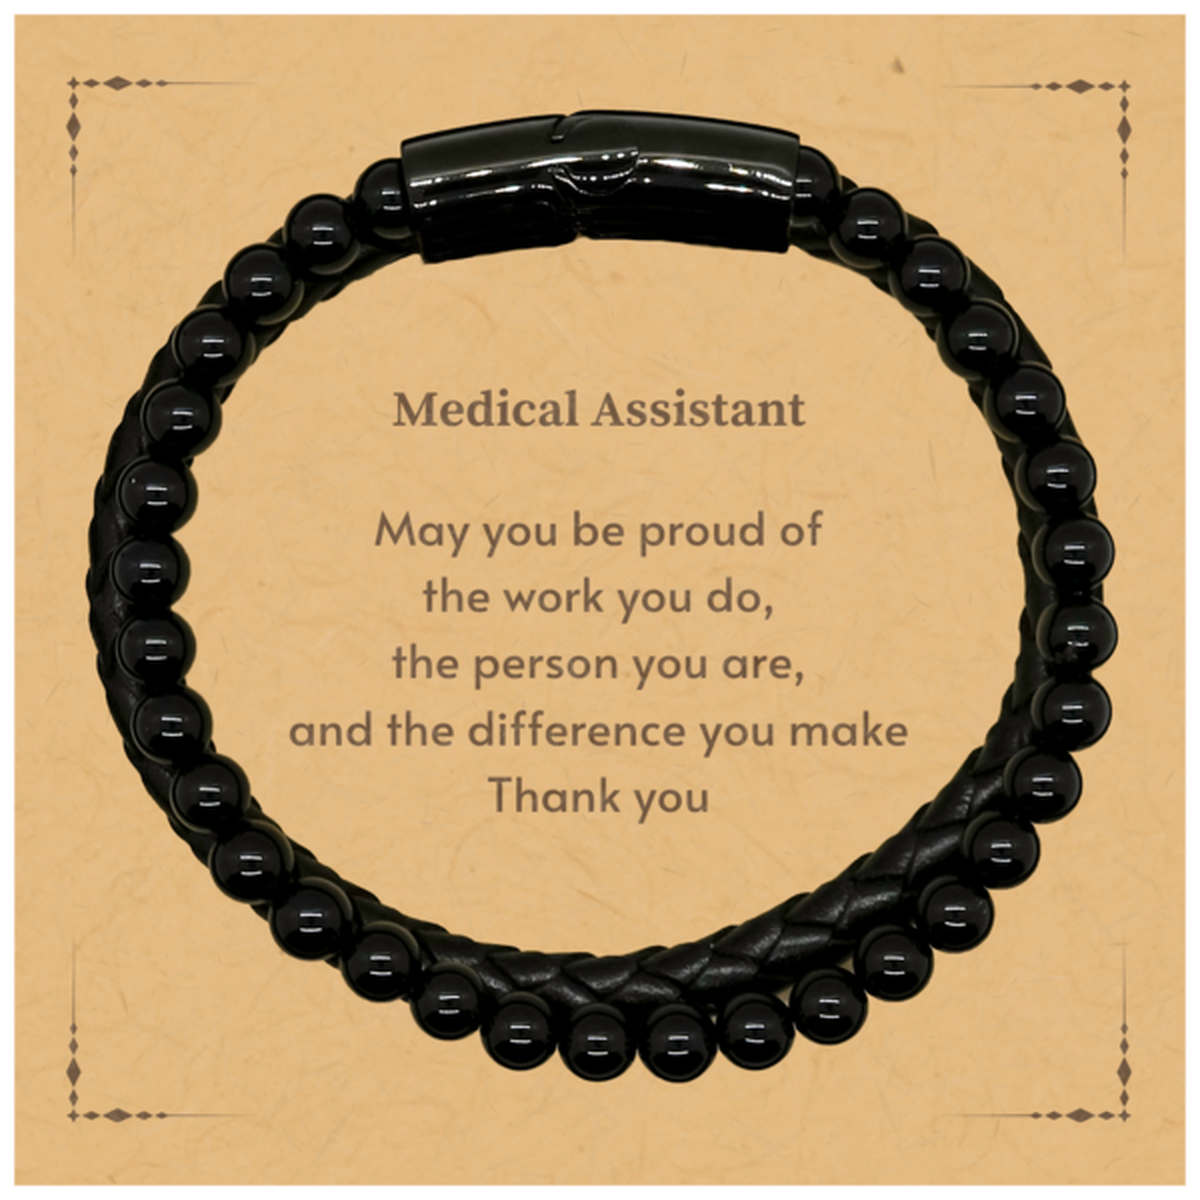 Heartwarming Stone Leather Bracelets Retirement Coworkers Gifts for Medical Assistant, Medical Assistant May You be proud of the work you do, the person you are Gifts for Boss Men Women Friends